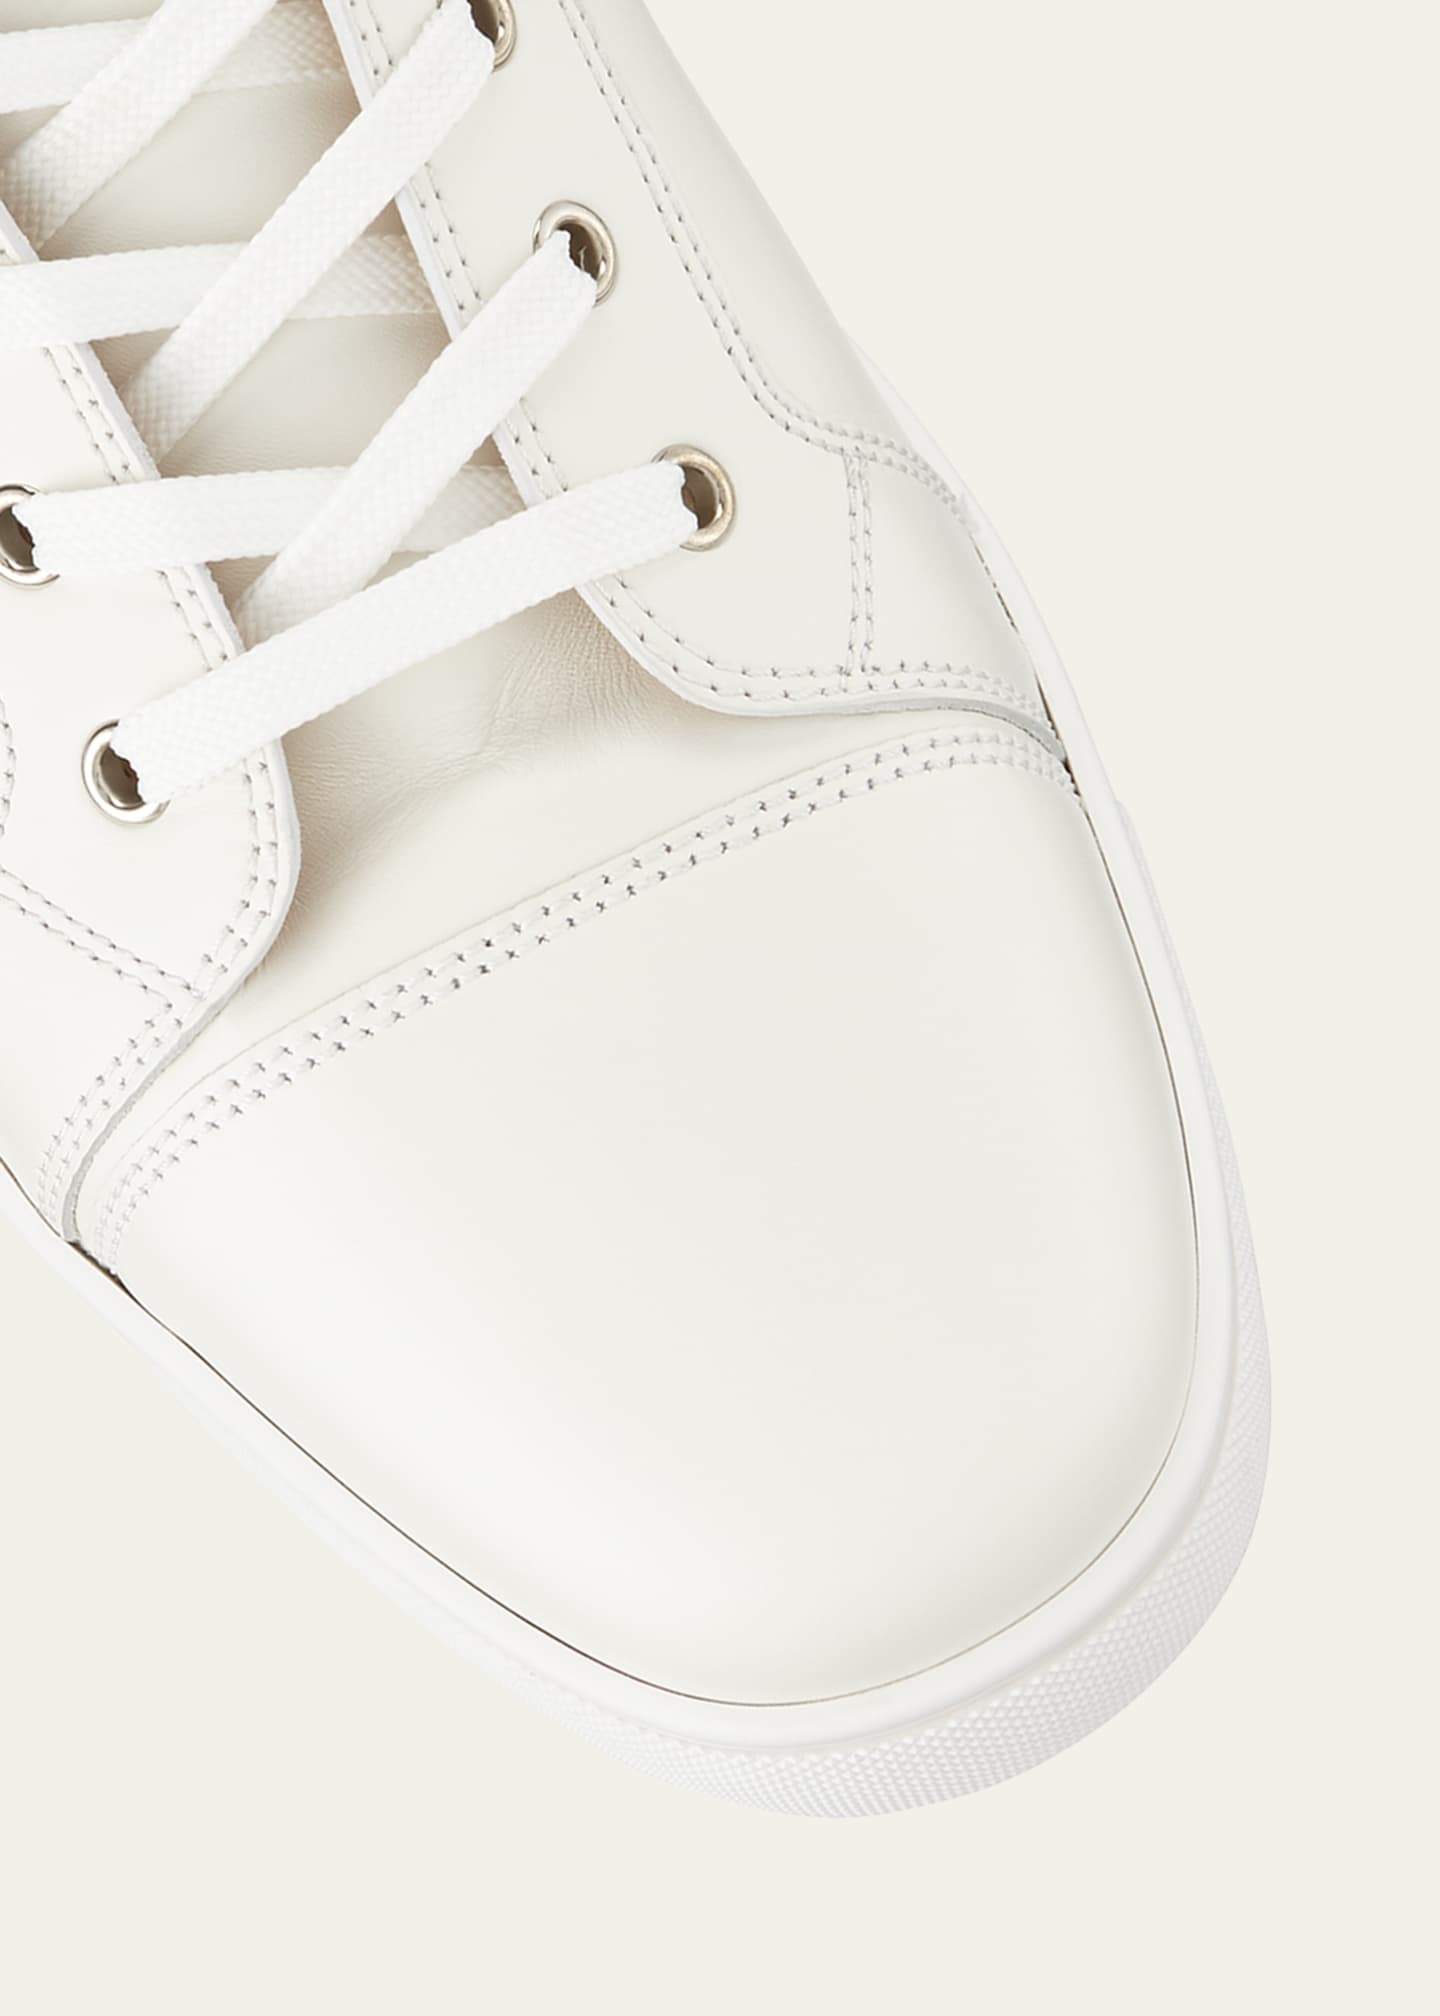 Christian Louboutin Louis Leather High-Top Sneakers - White - 40.5